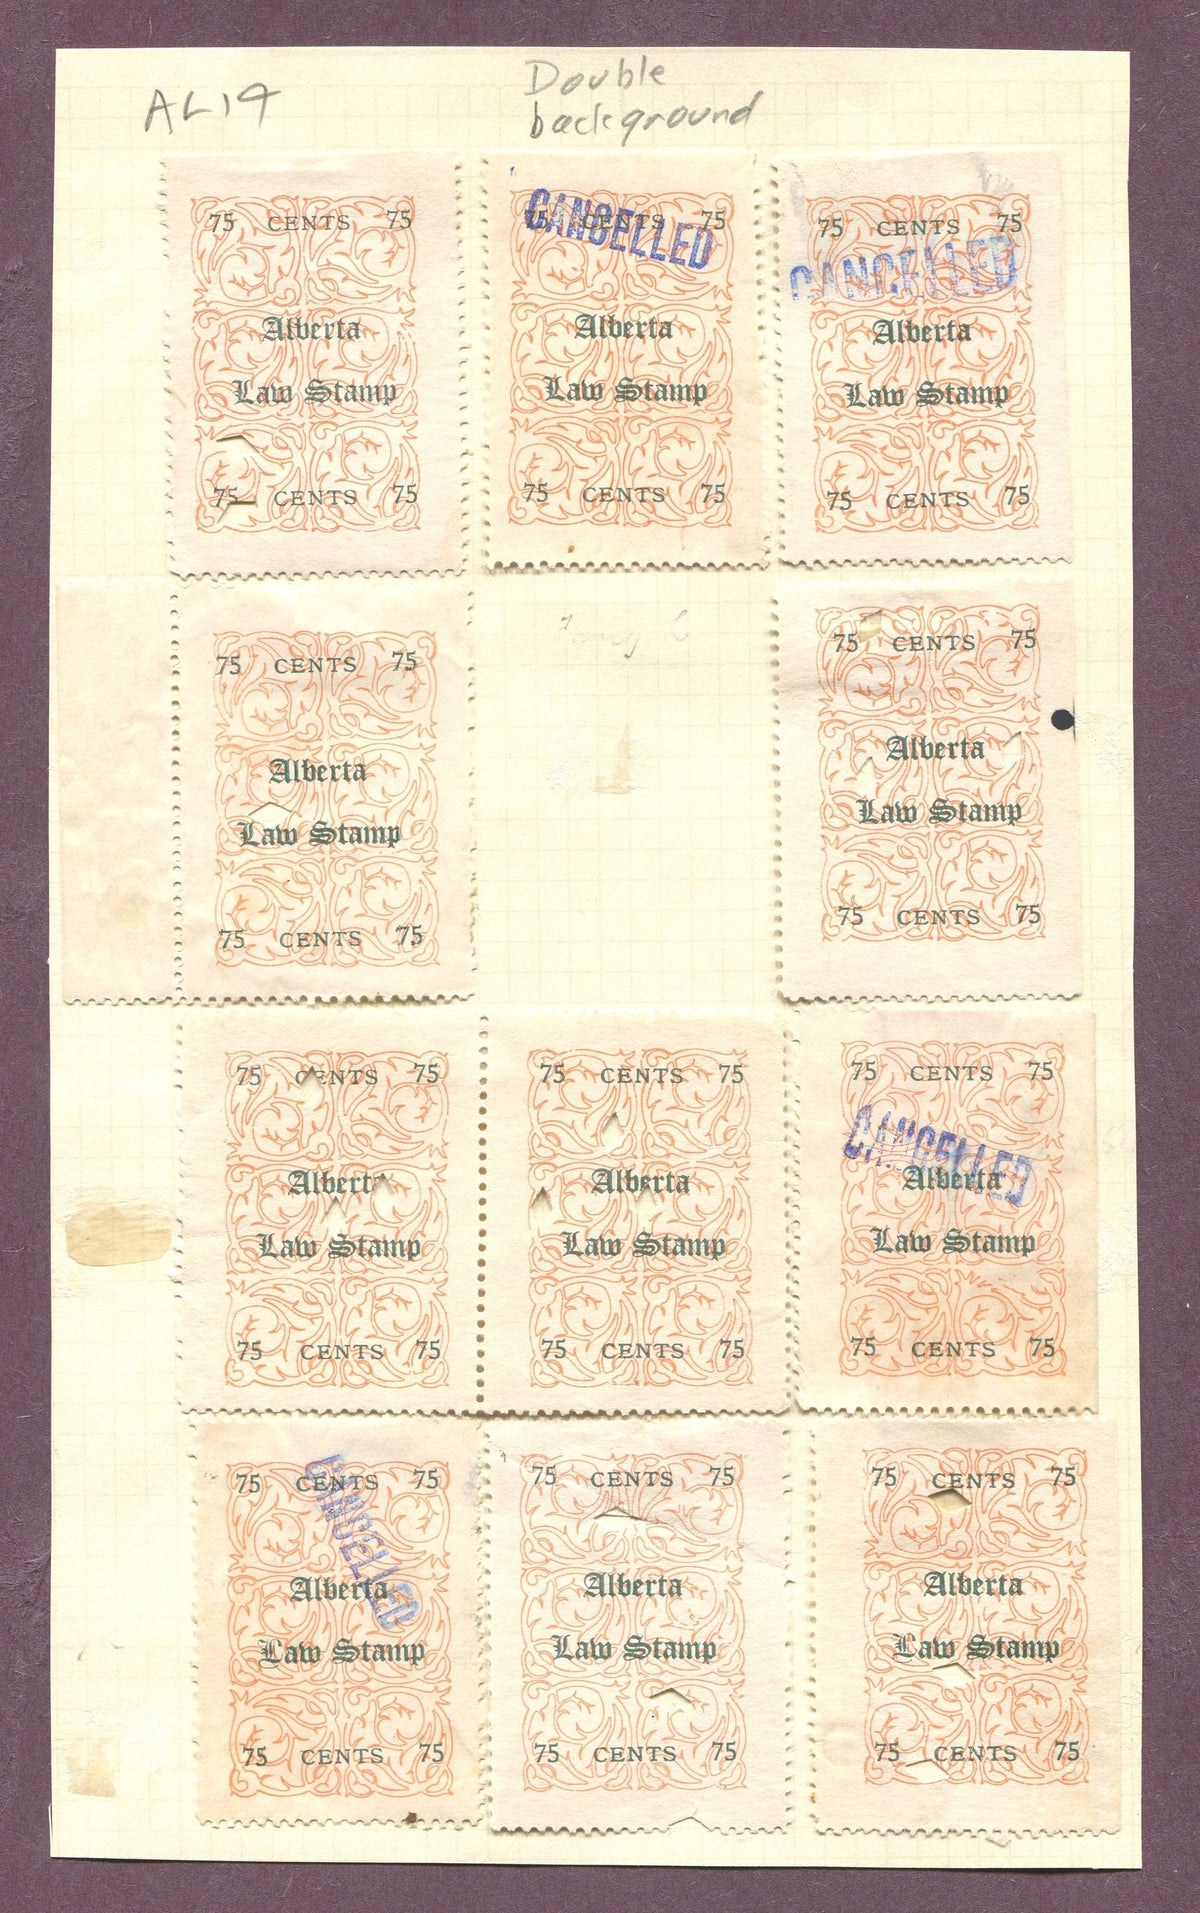 0014AL1709 - AL14 - Used Partially Reconstructed Sheet